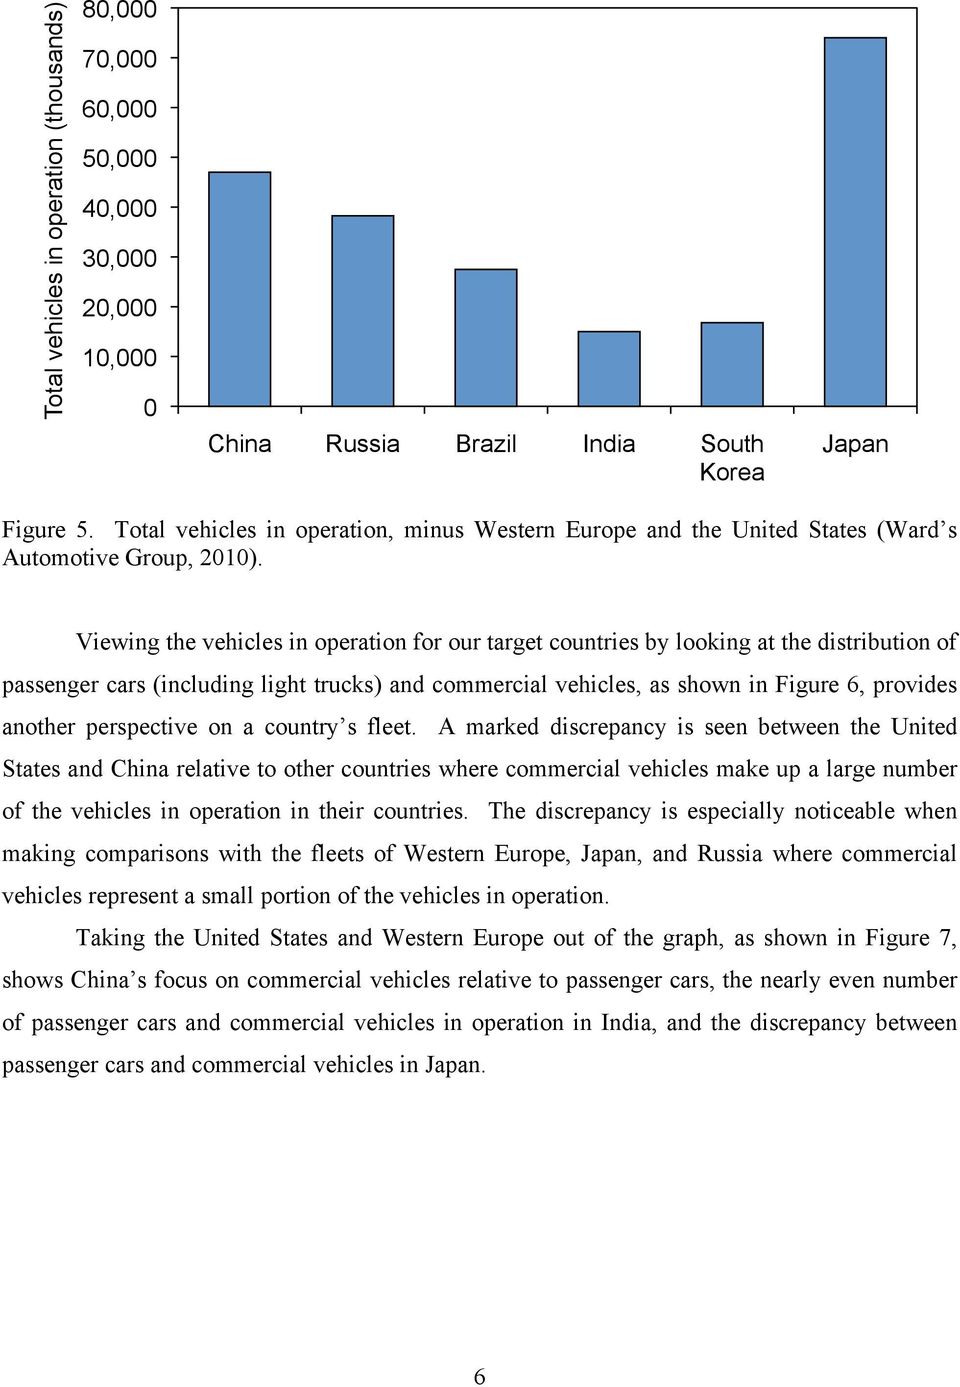 Viewing the vehicles in operation for our target countries by looking at the distribution of passenger cars (including light trucks) and commercial vehicles, as shown in Figure 6, provides another